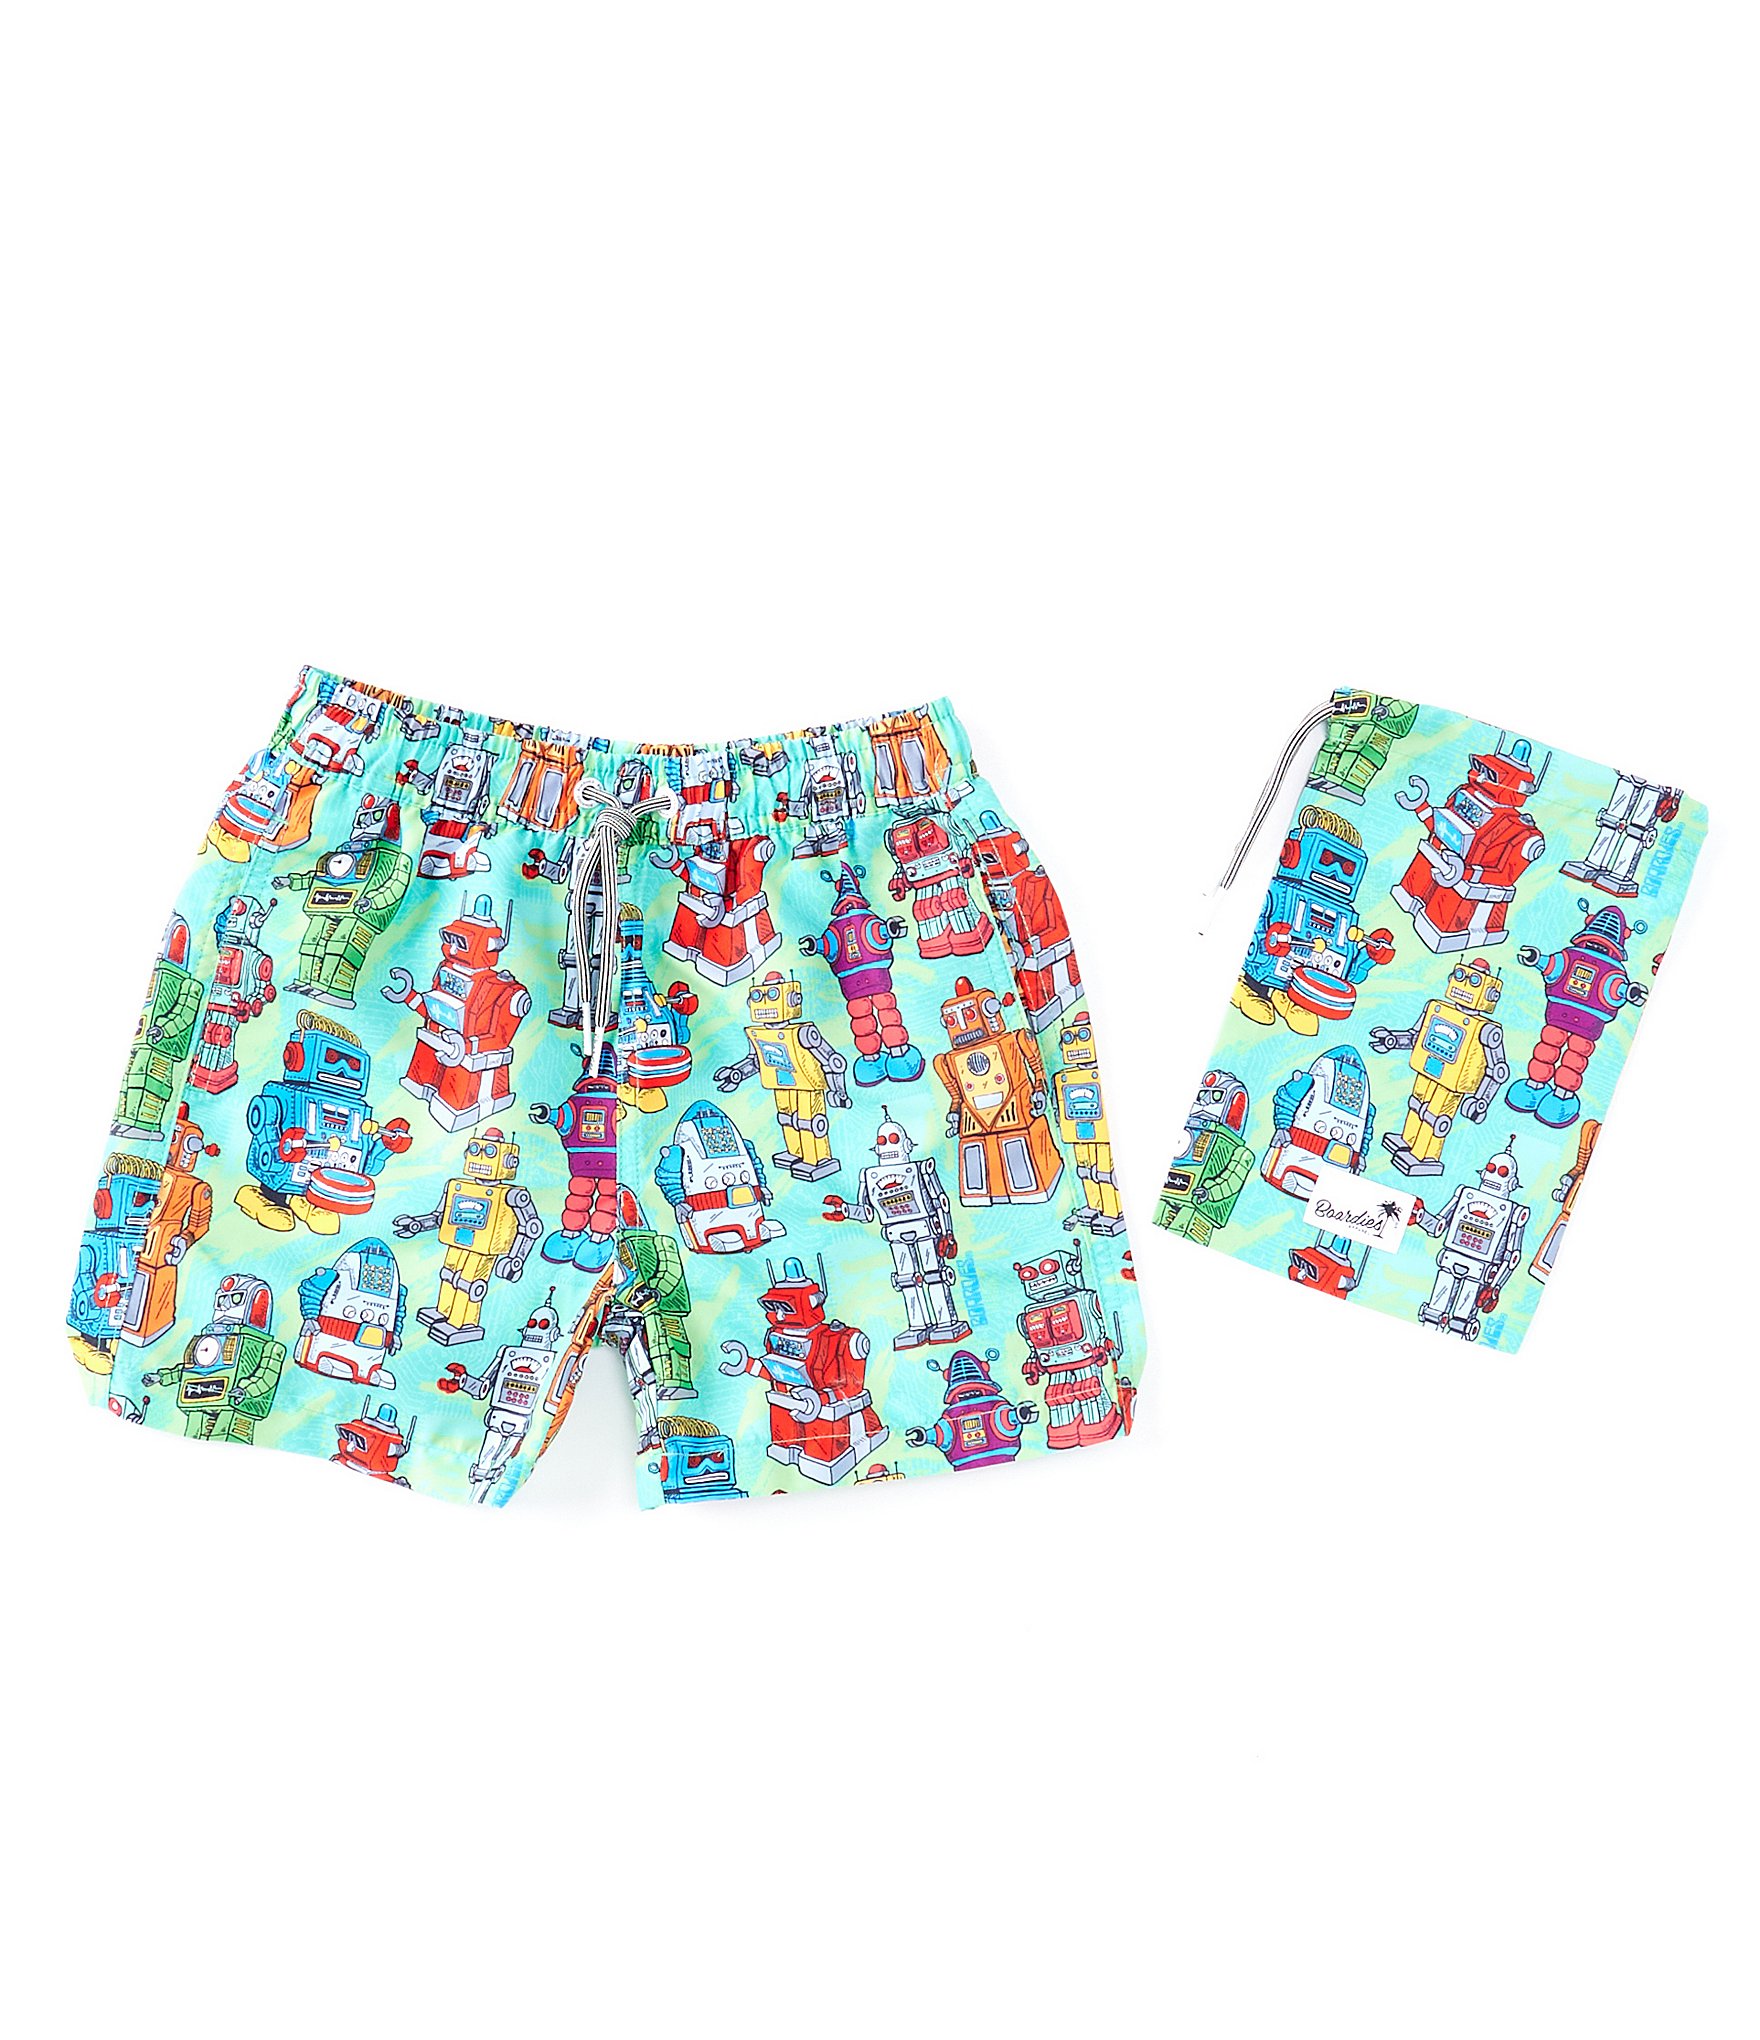  CHIFIGNO Cancer Awareness Colorful Ribbons Little Boys Swim  Trunks Toddler Swim Shorts Boys Swim Suit Little Boys Bathing Suit, 2T:  Clothing, Shoes & Jewelry